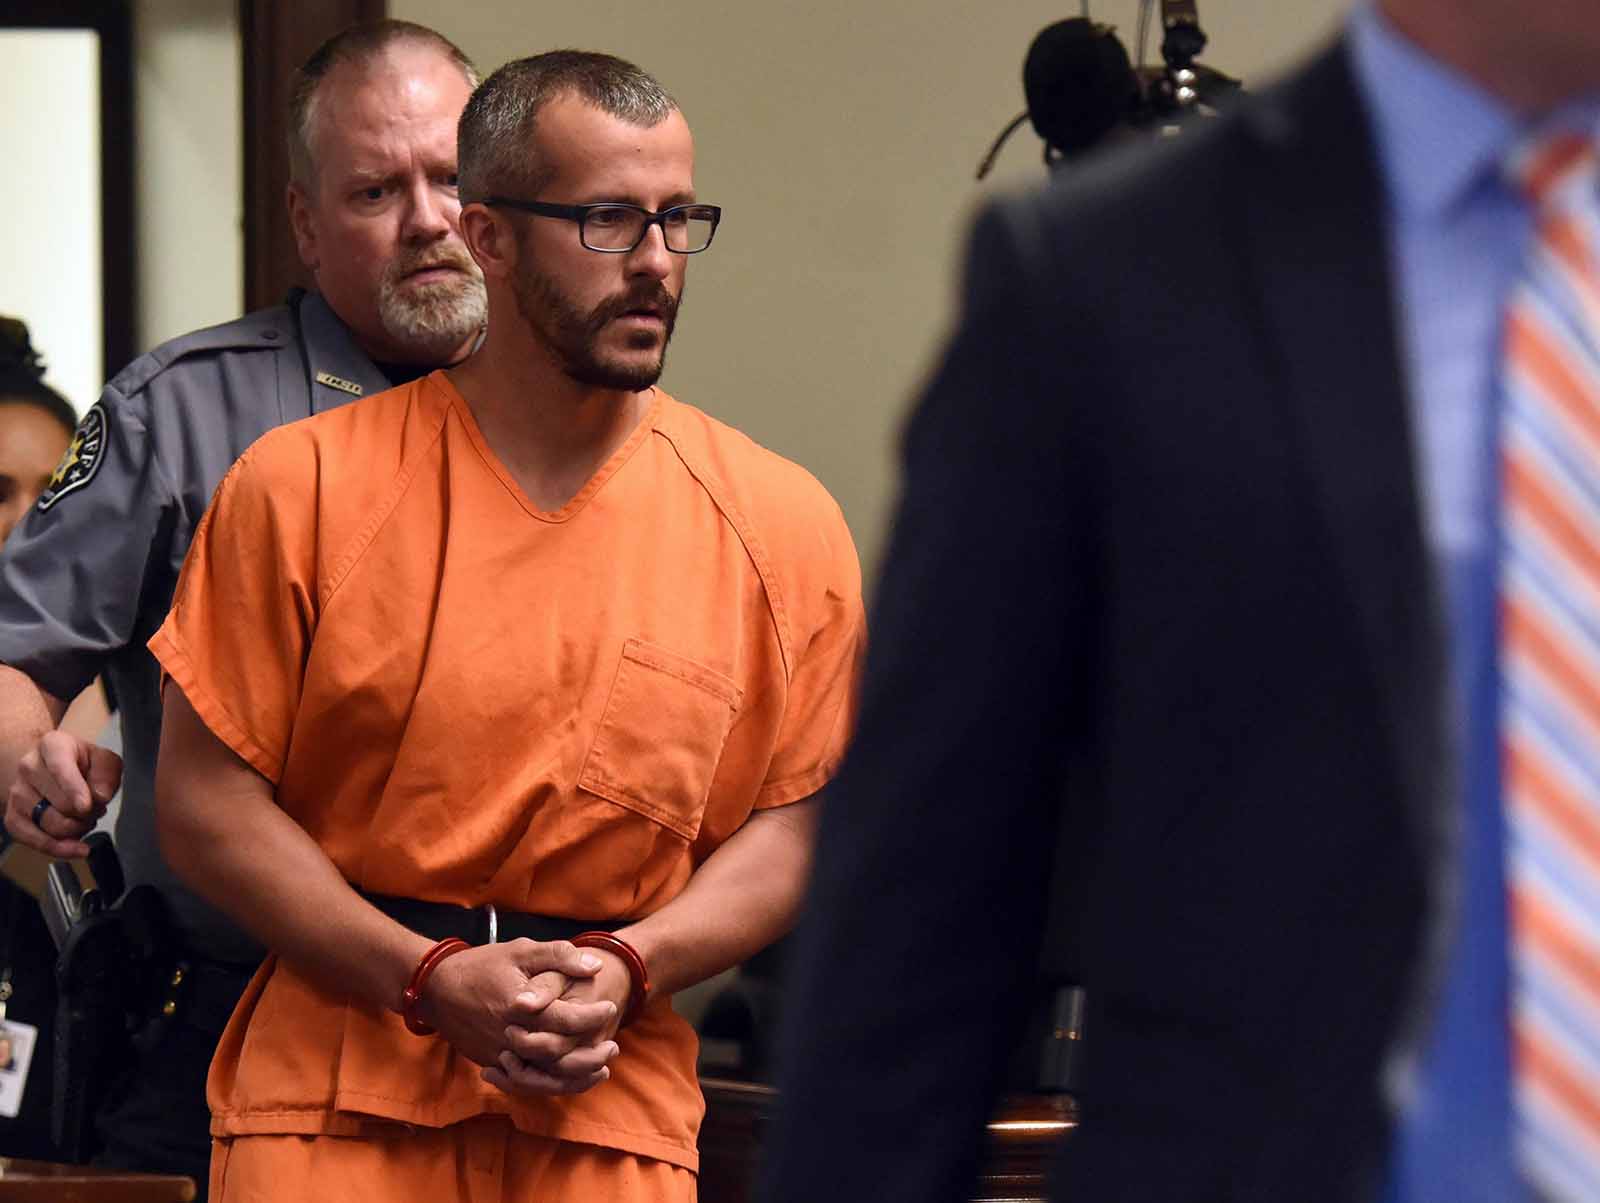 'American Murder: The Family Next Door' attempts to shine a new light on the murders Chris Watts committed against his family.